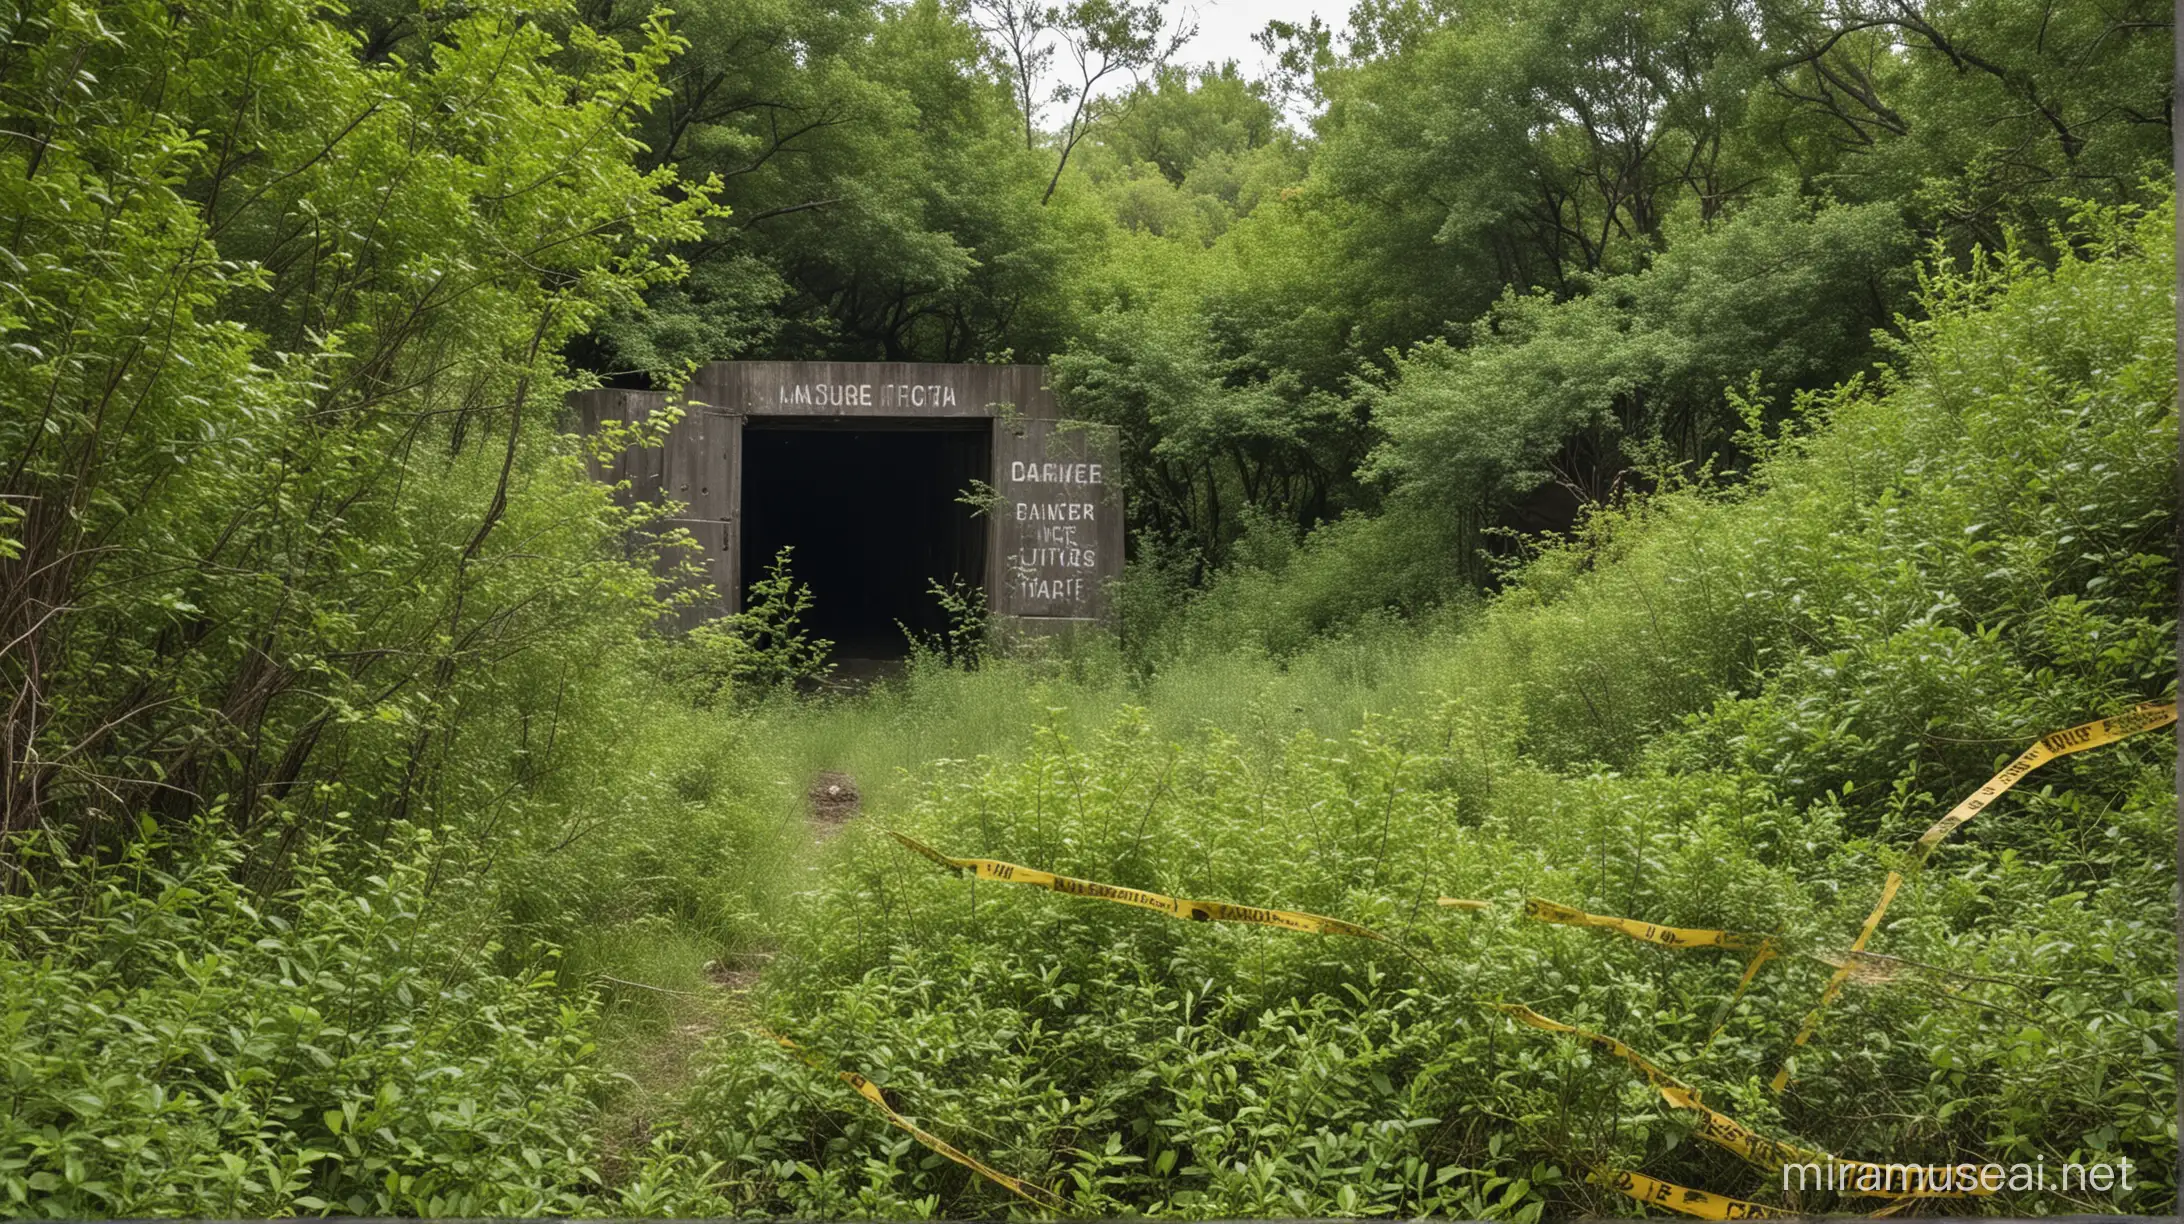 An abandoned mine shaft, its entrance barely visible amidst overgrown bushes and trees. A sign warns of danger, with caution tape fluttering in the breeze.